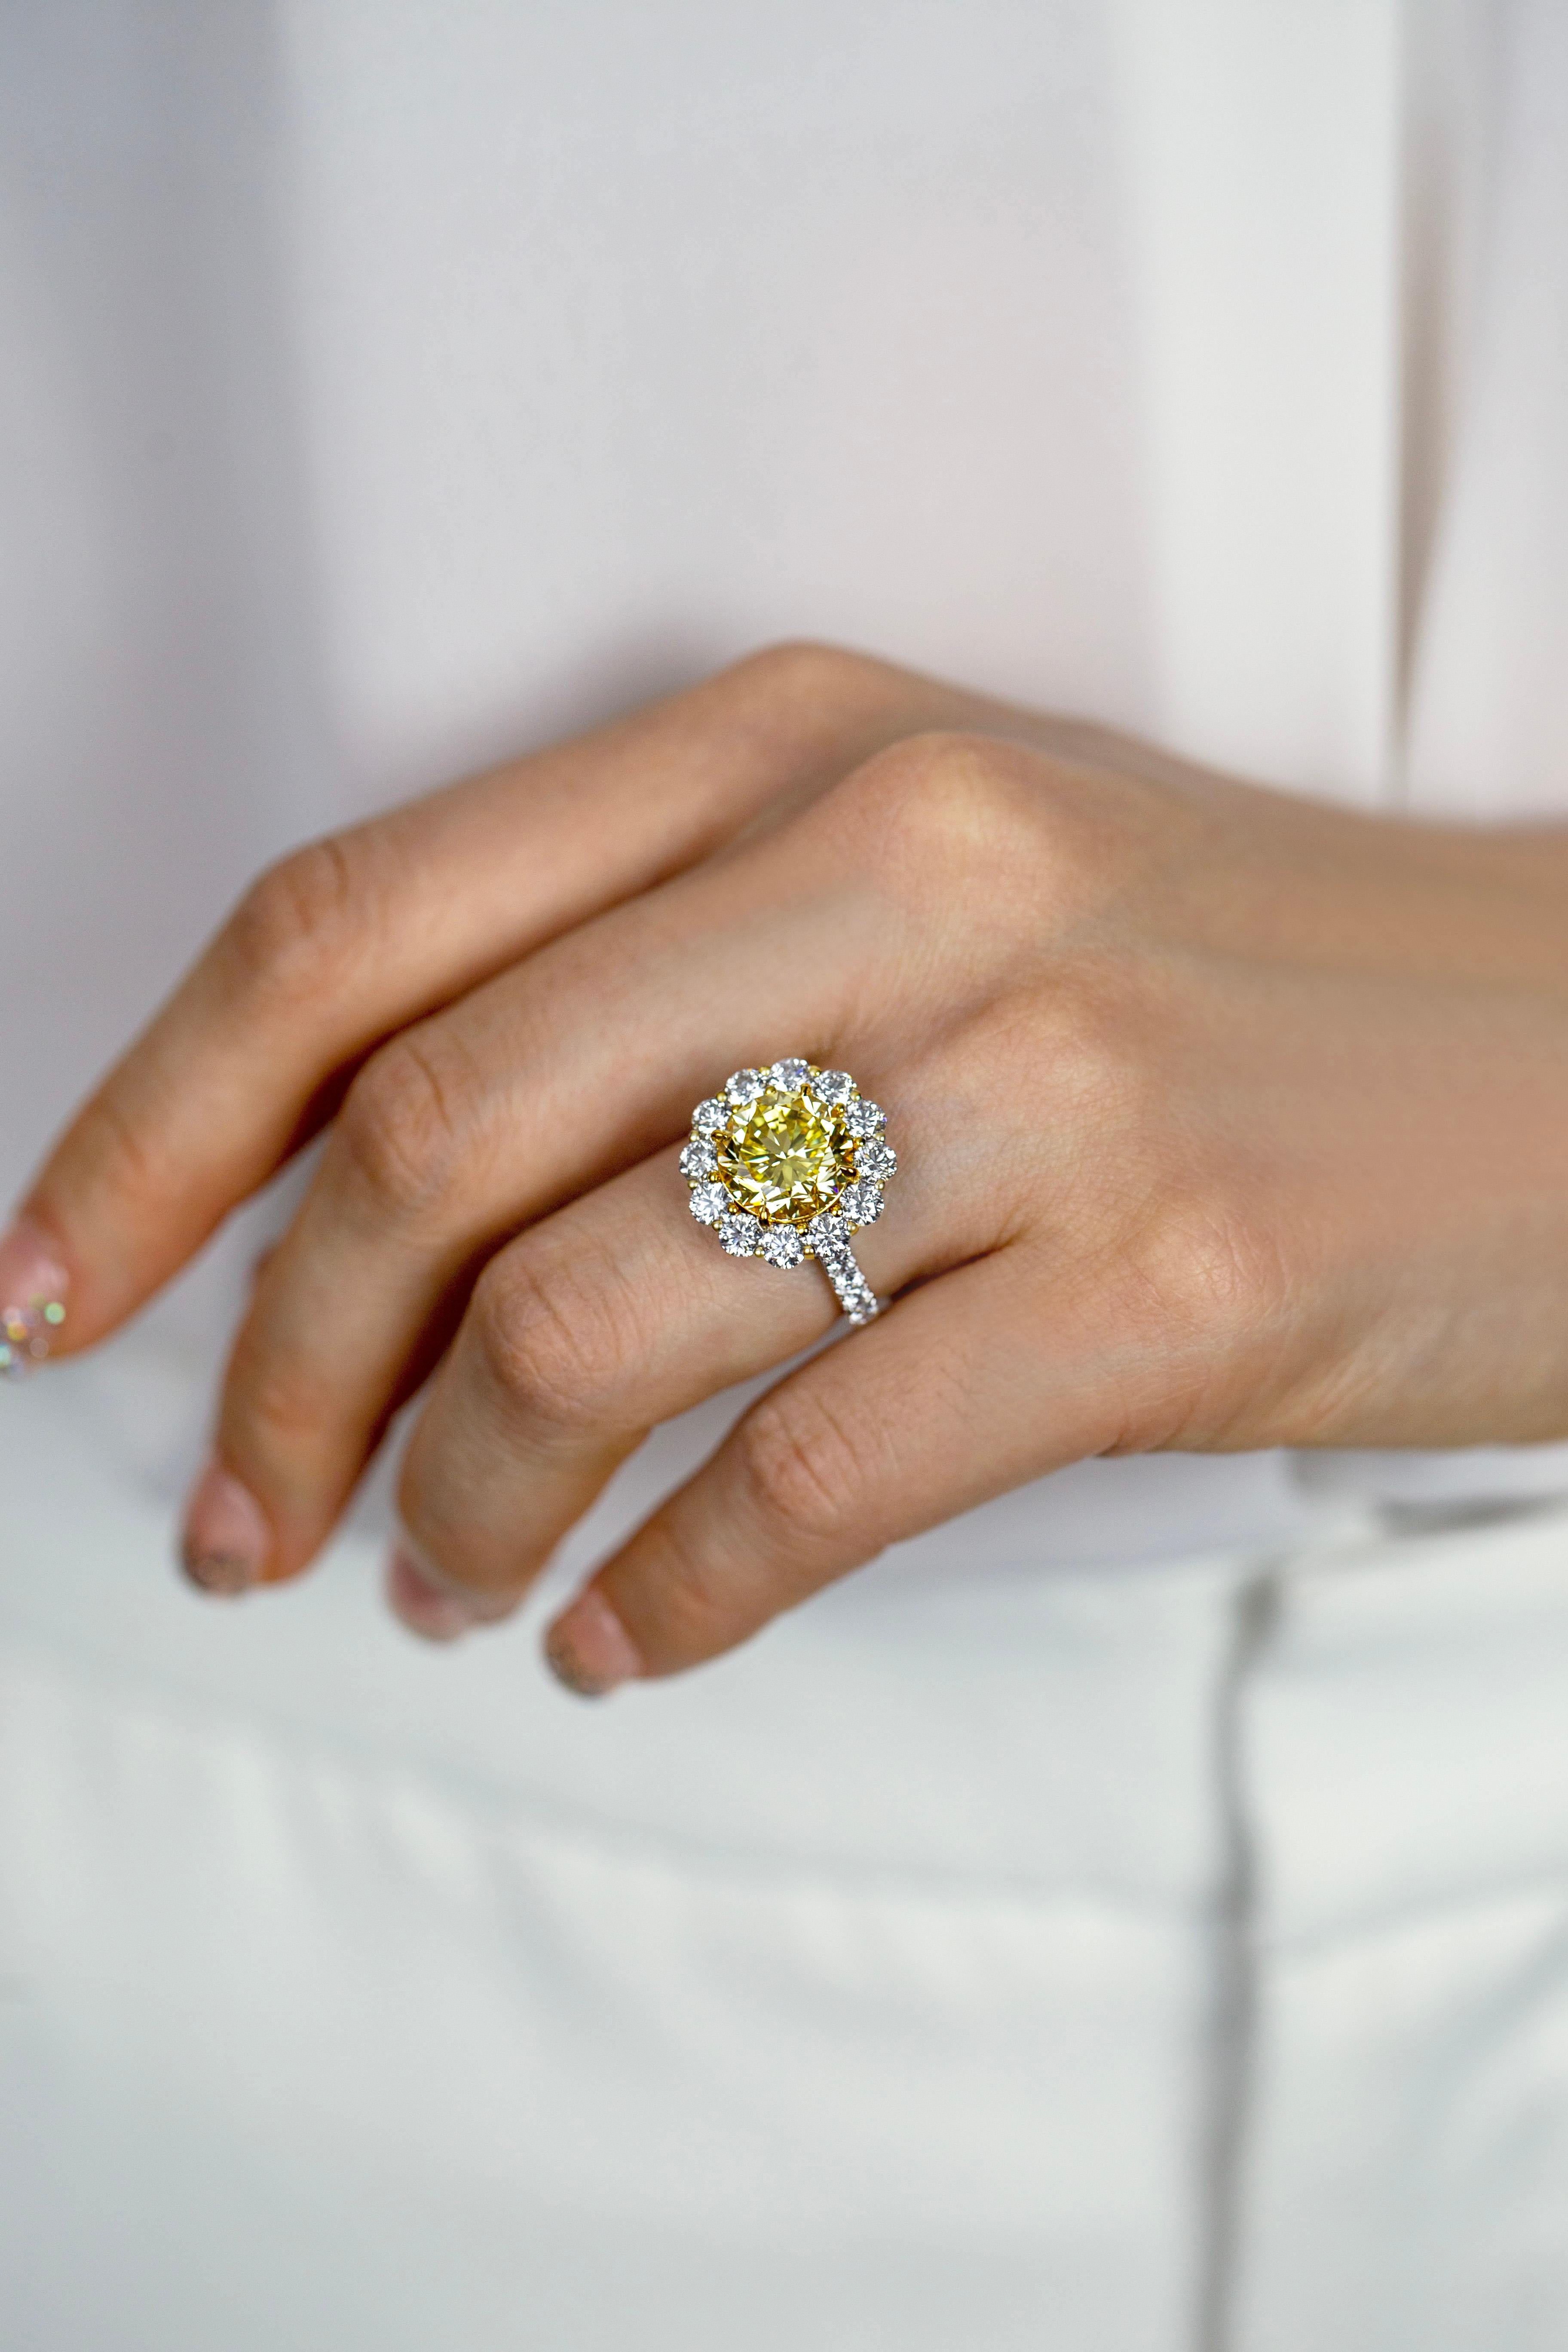 Modern GIA Certified 4.47 Carat Round Cut Fancy Intense Yellow Diamond Engagement Ring For Sale